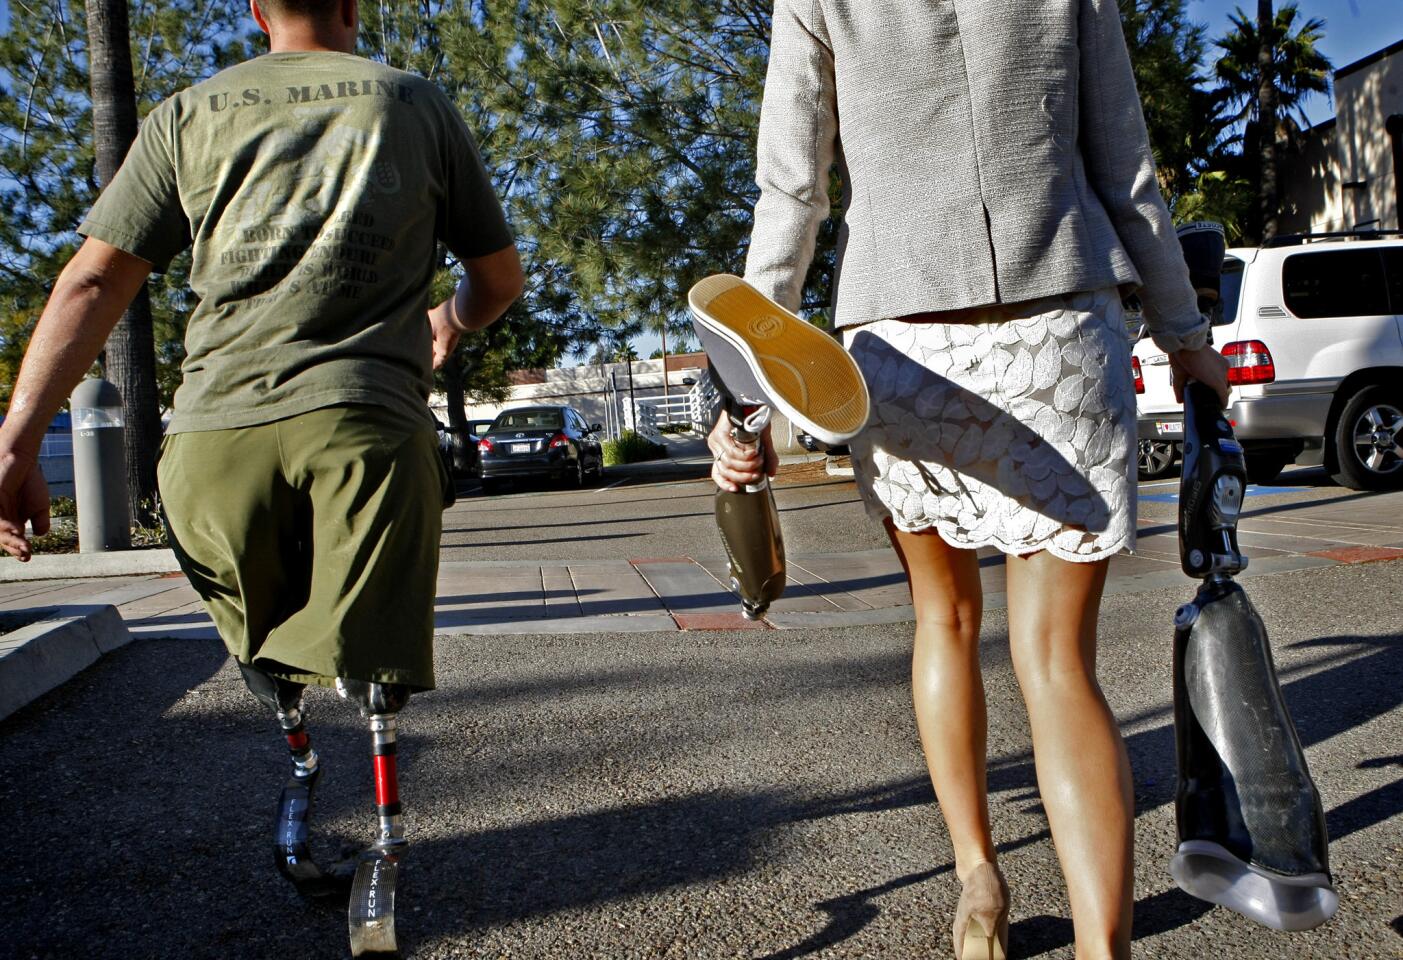 After a workout at Naval Medical Center San Diego, Marine Staff Sgt. Mark Zambon and wife Marta walk to their car. She carries his regular walking legs while he uses athletic prosthetic legs.